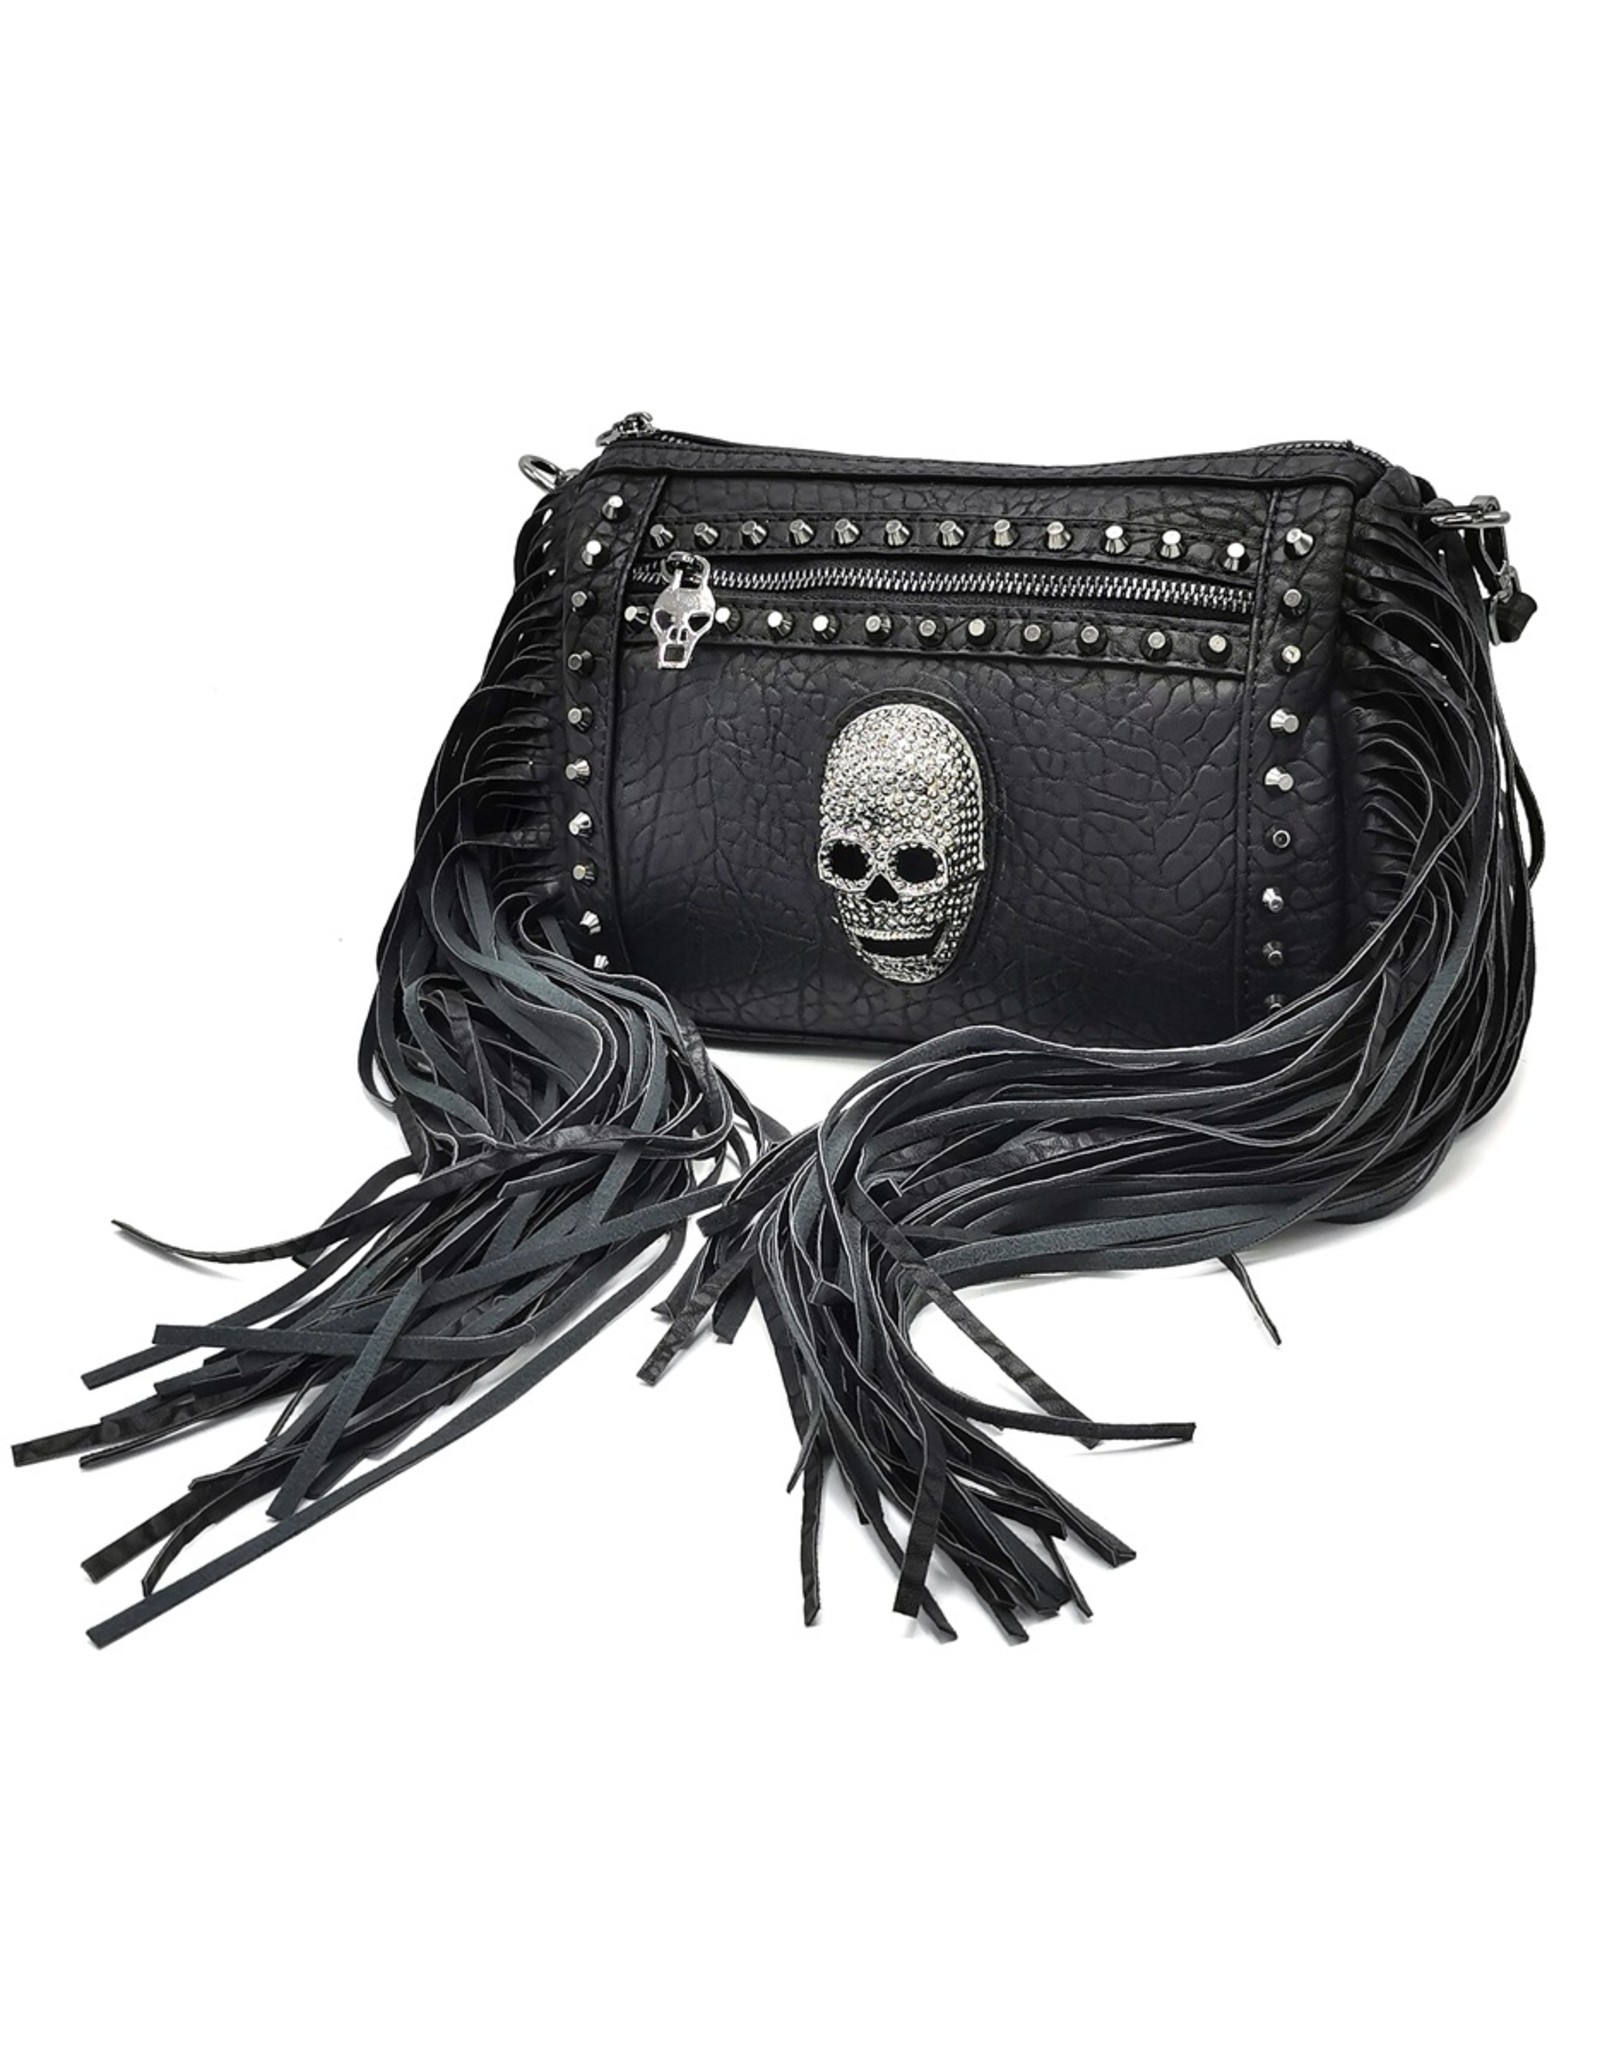 Dark Desire Gothic bags Steampunk bags -  Gothic Shoulder Bag with Metal Skull and Fringes